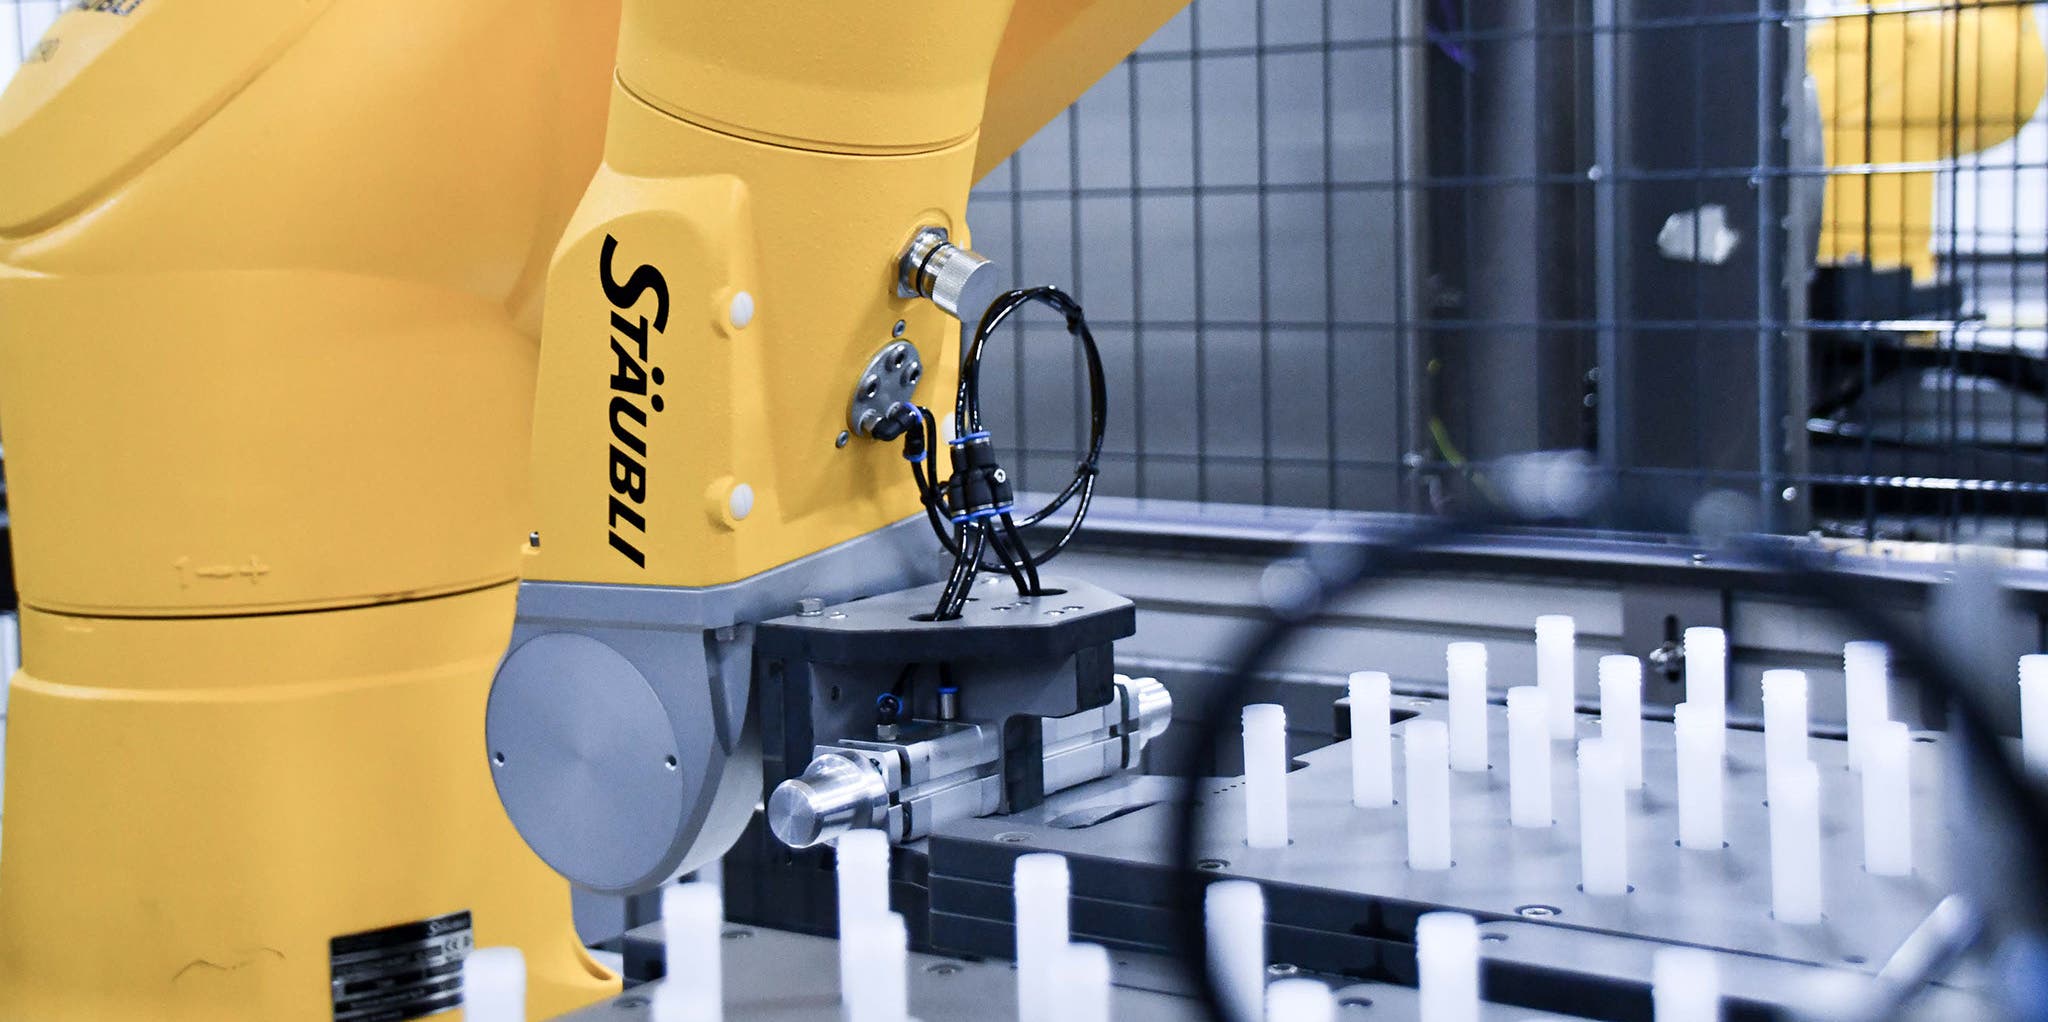 The six-axis robot is the “master” of the robot cell. It handles the test tubes before and after their filling with active Covid-19 test substance.